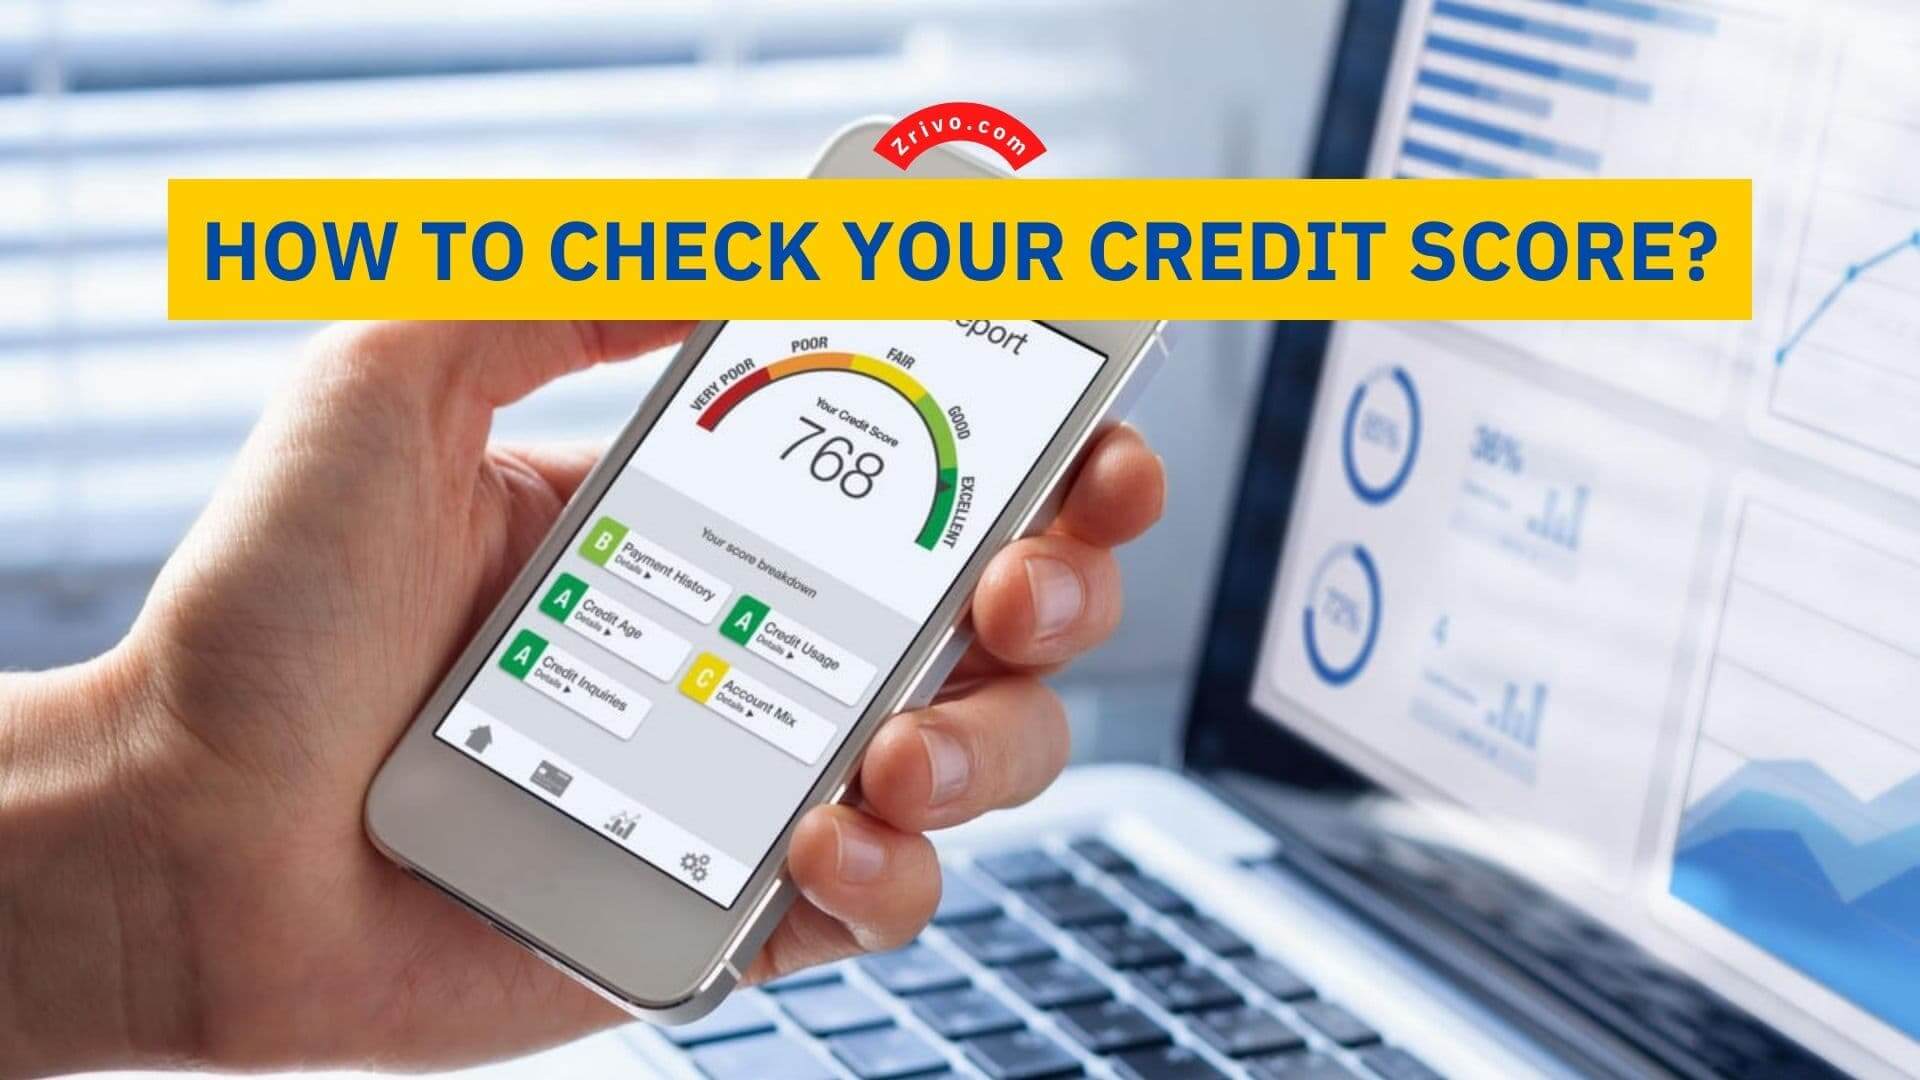 How-to-Check-Your-Credit-Score-Zrivo-Cover-1